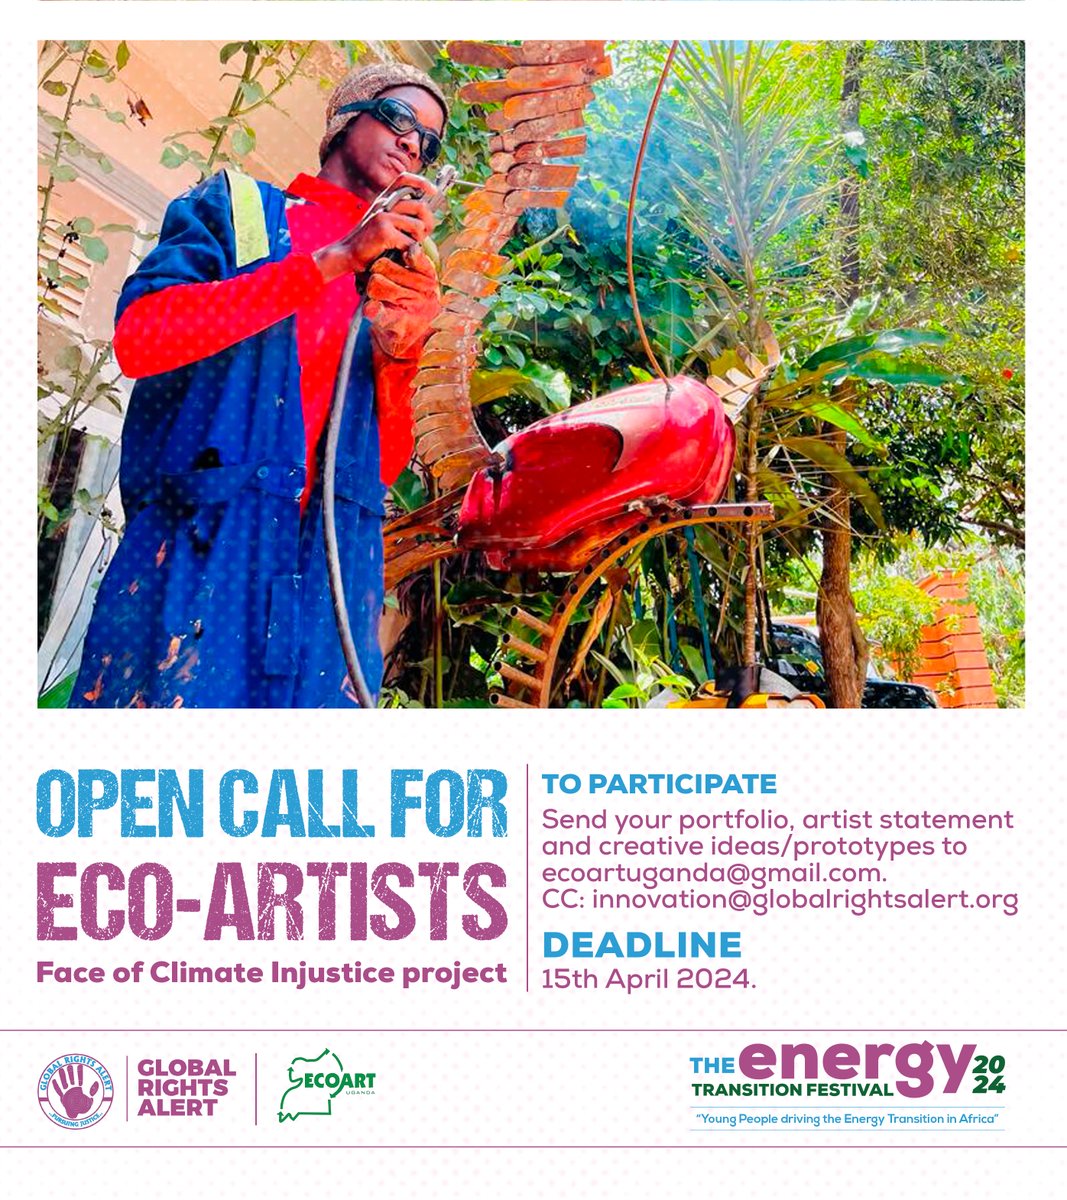 .@graUganda recognizes the urgent global need to combat climate change and its devastating effects. As part of our upcoming Energy Transition Festival, we call upon visual artists who are passionate about climate change and can use their skills to show the ugly face of climate…